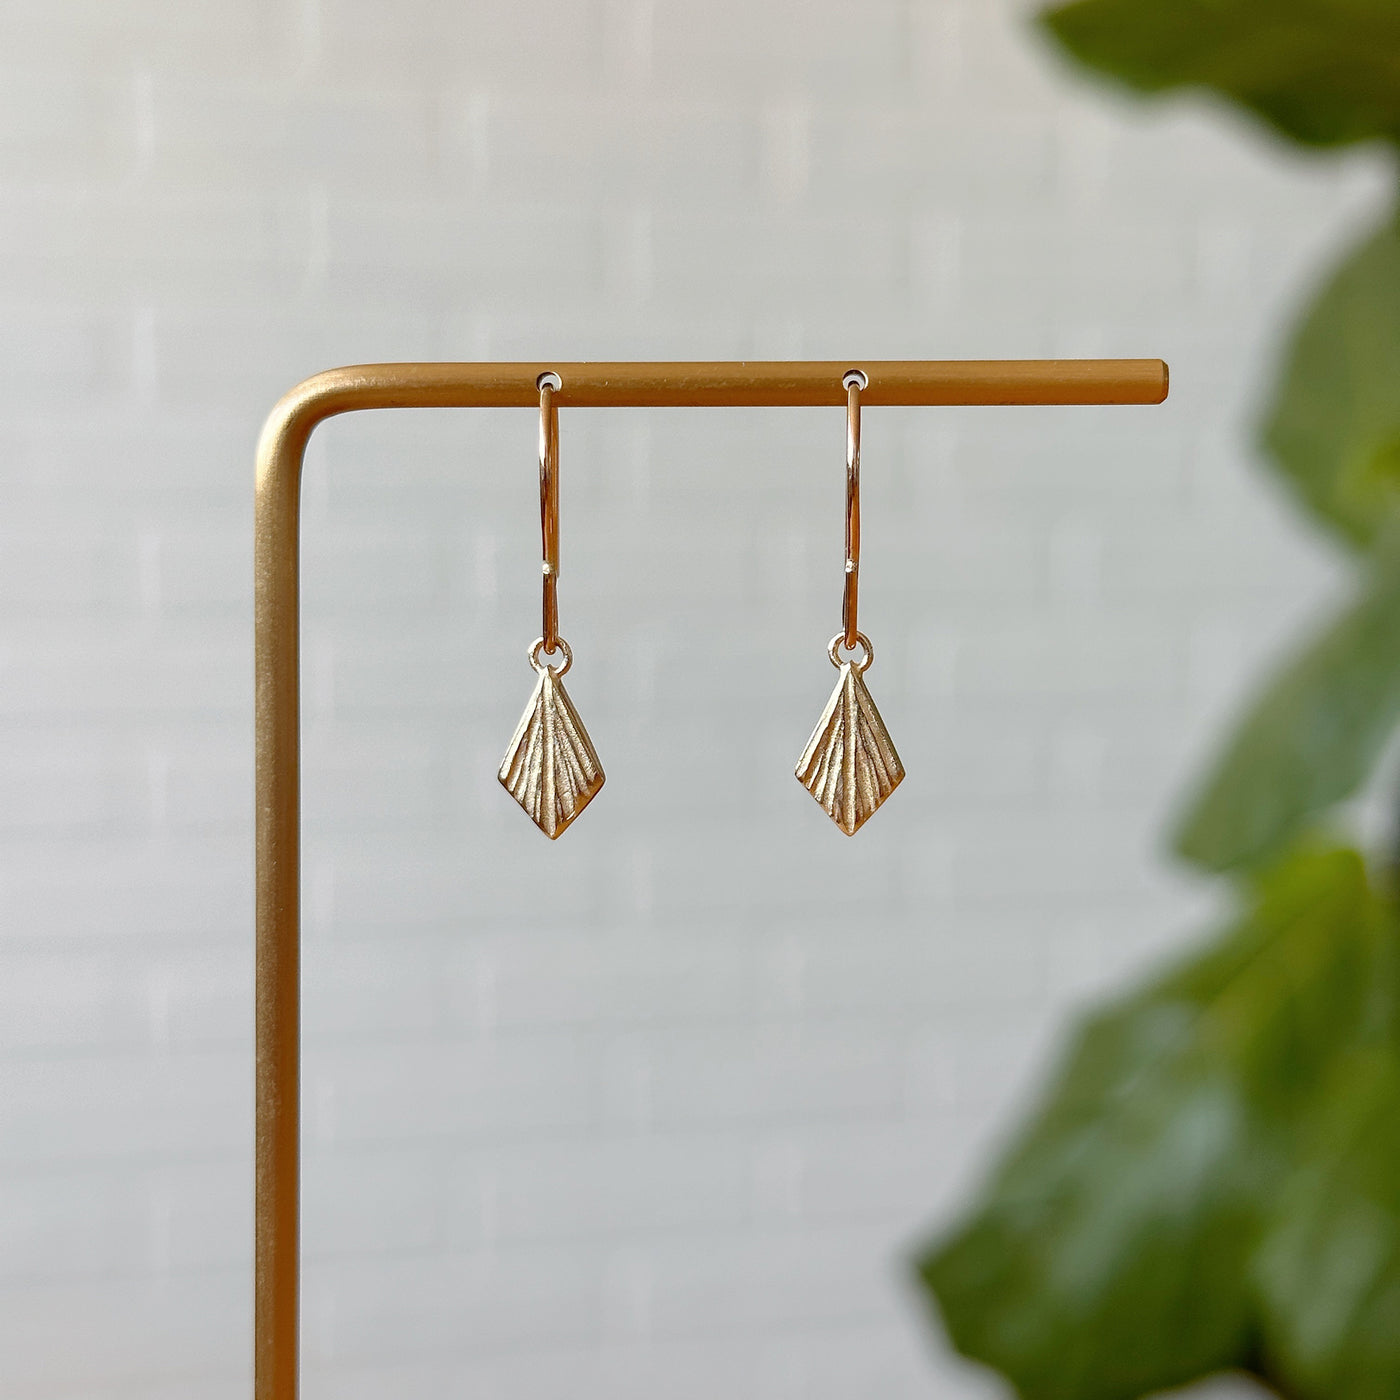 Flame Gold Dangle Earrings hanging in front of a white brick wall, front angle